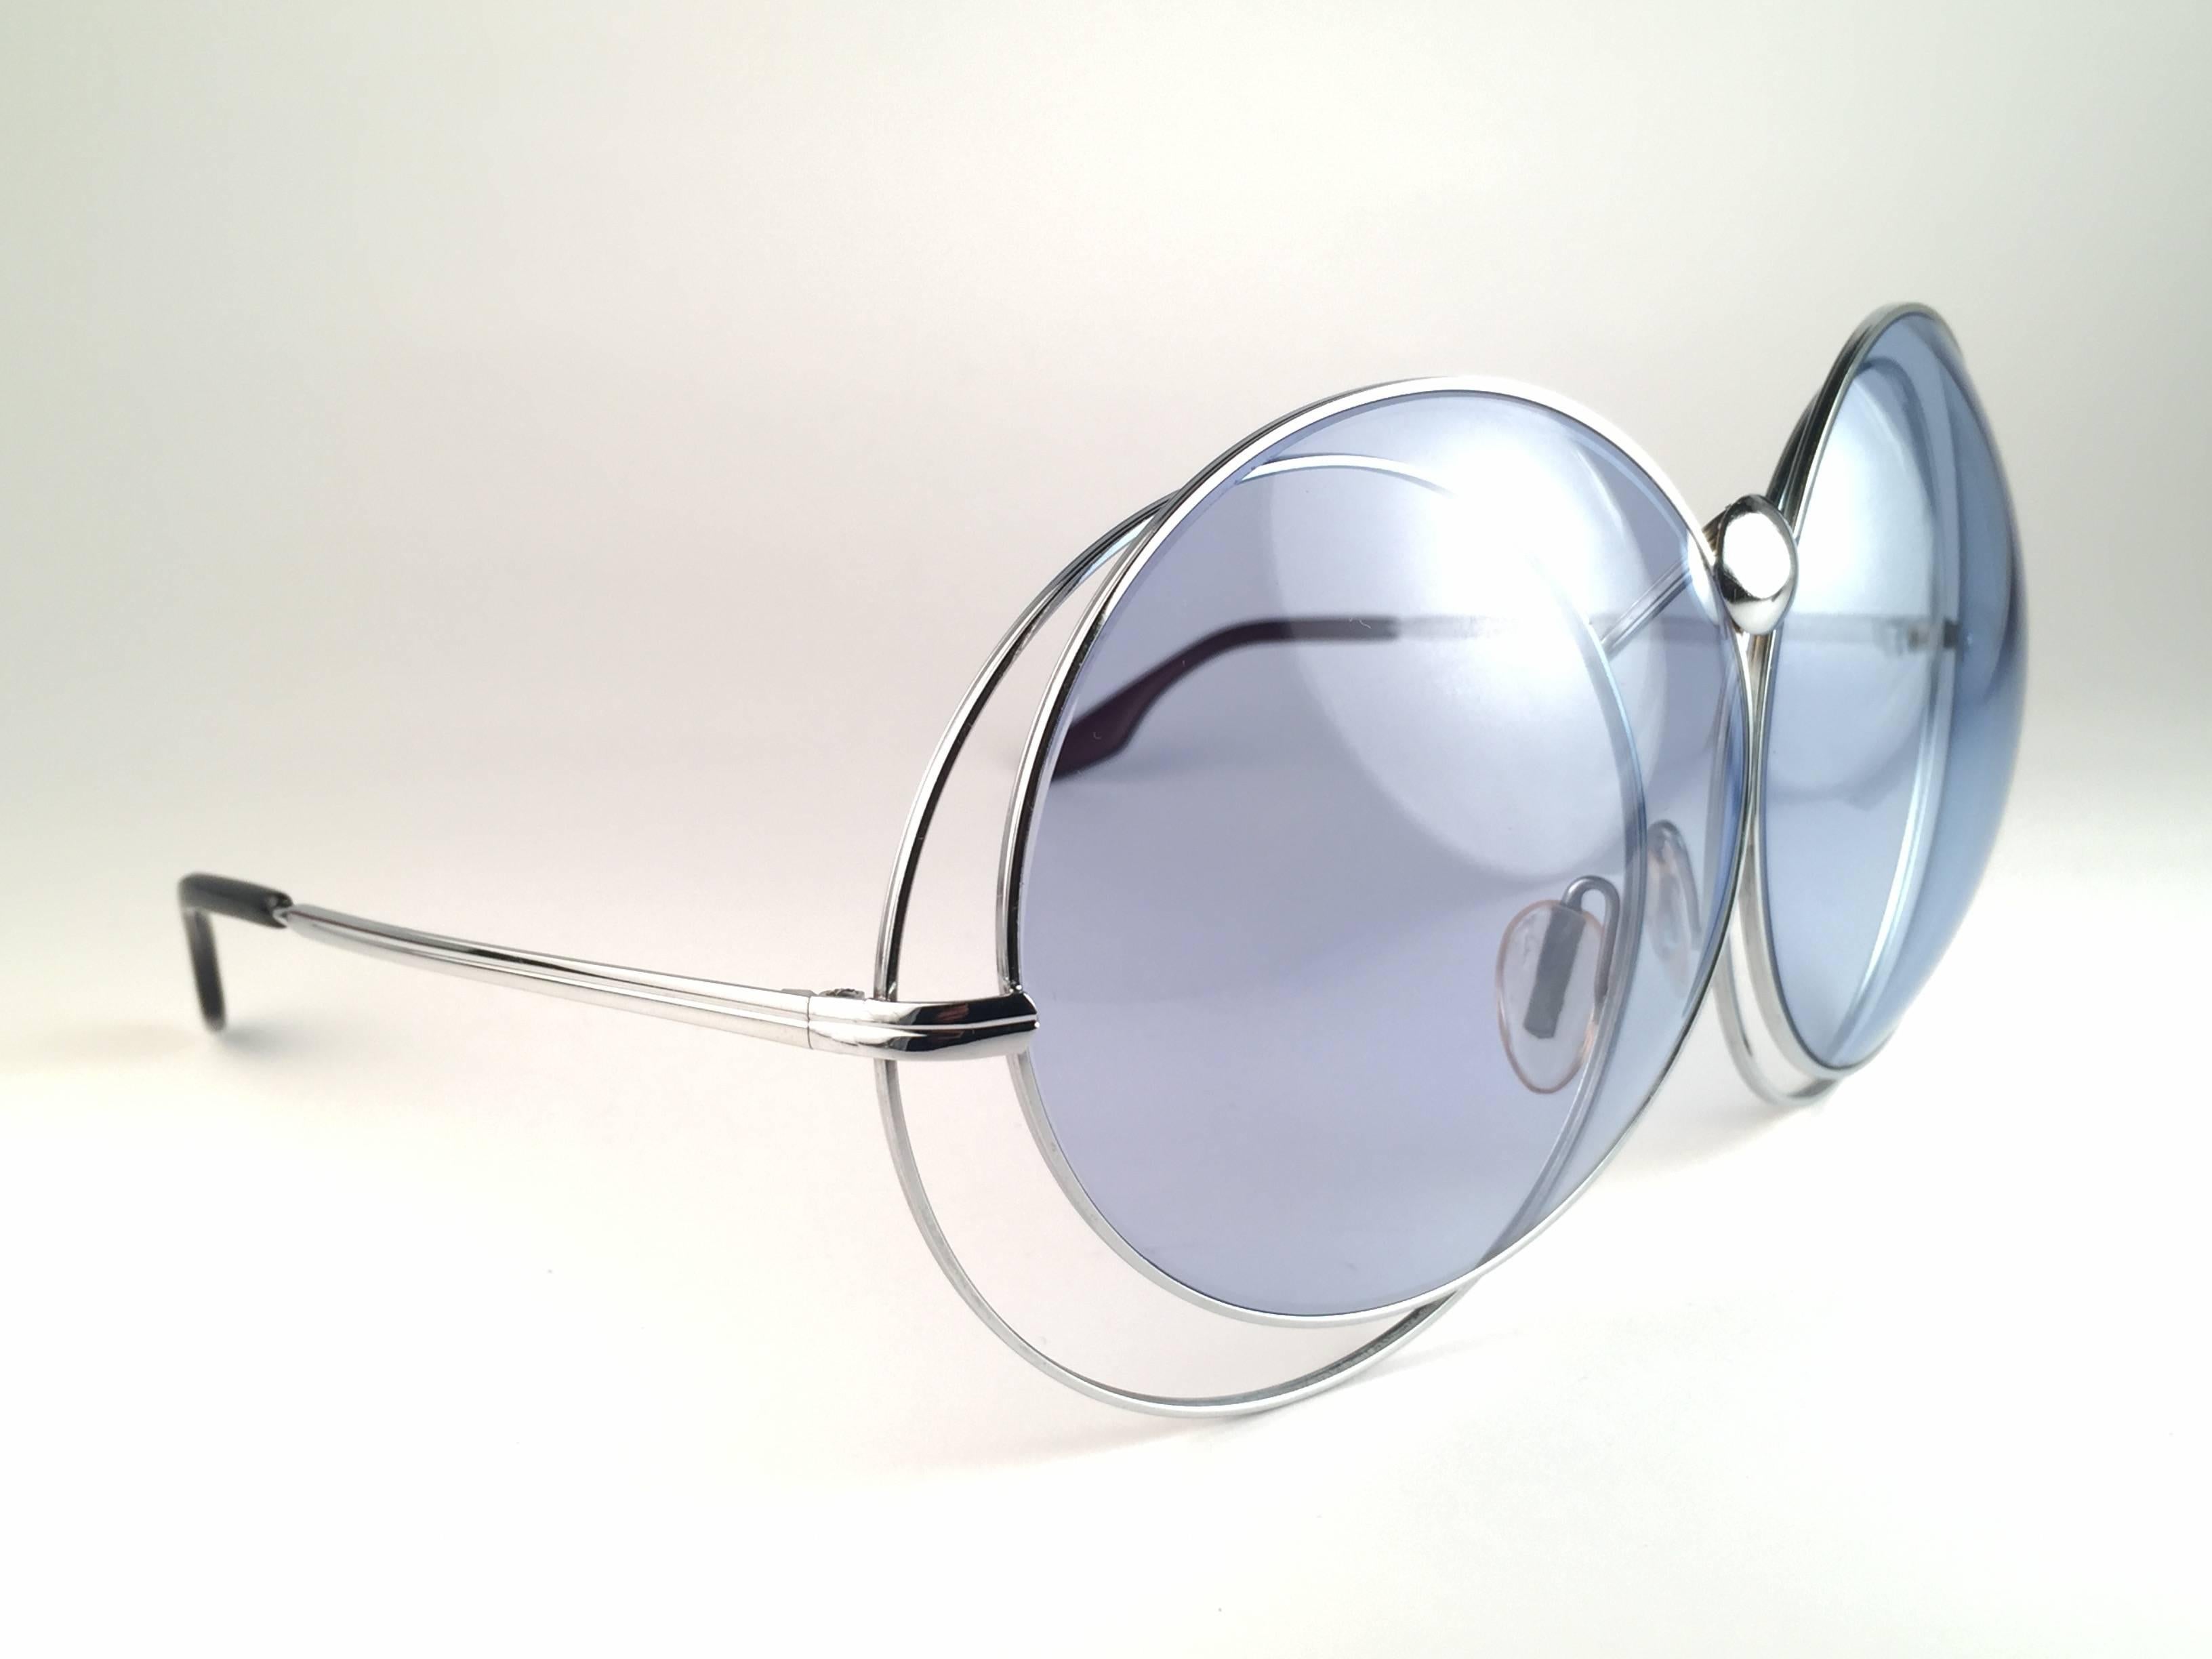 Superb. Rare Collectors Item New Vintage Christian Dior Oversized 1970's Sunglasses. 

Interlocked silver metal oversized frame holding a spotless pair of celest blue lenses. 
Made in Germany.
 
Produced and design in 1970's.

New, never worn or